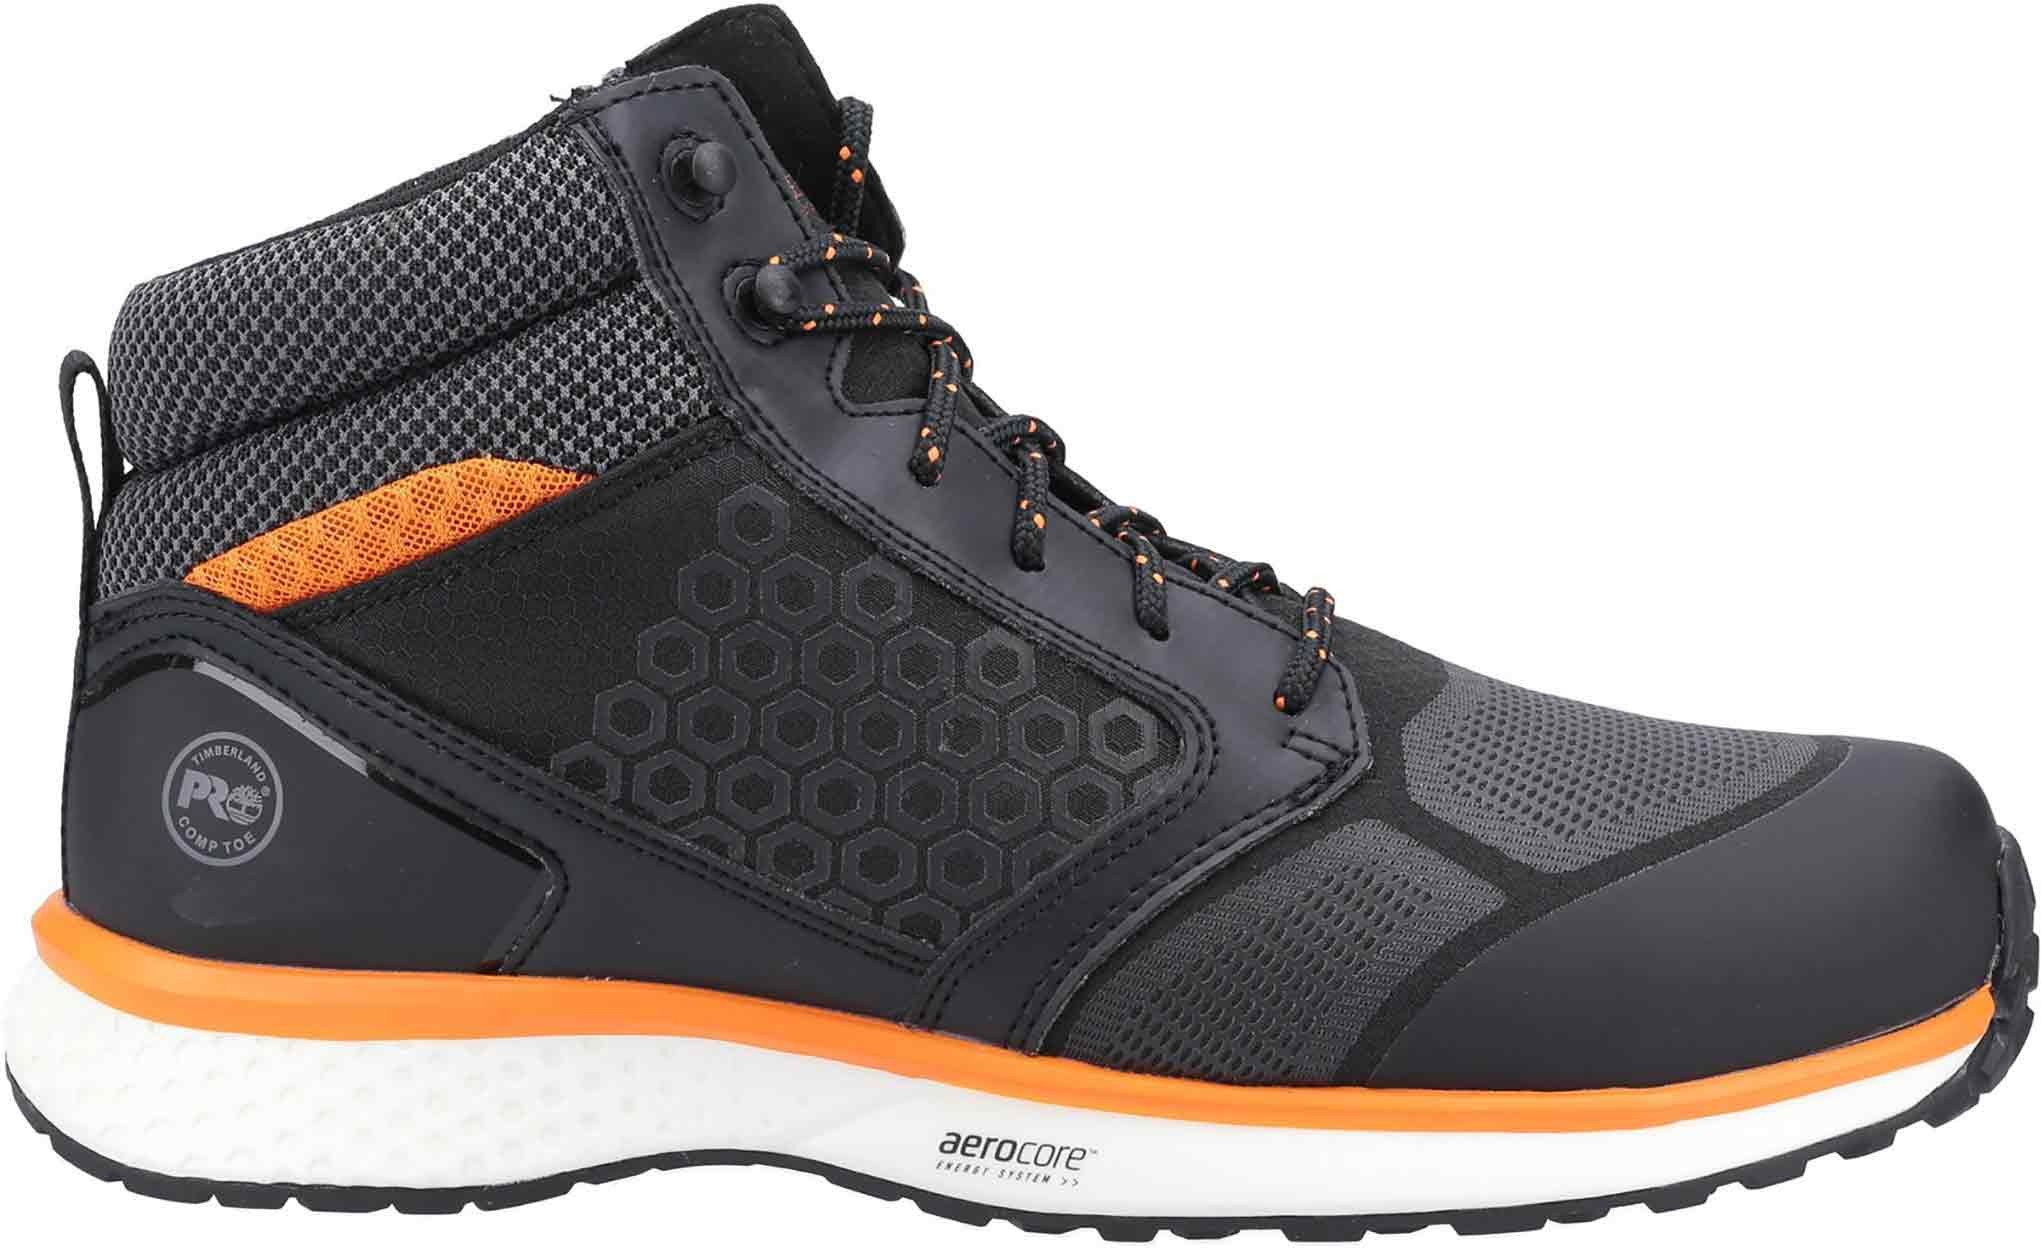 Timberland Pro Reaxion Mid S3 Hiker Boot Black/Orange - Composite and Metal  Free Safety Footwear - Mens Safety Boots & Shoes - Safety Footwear - Best  Workwear